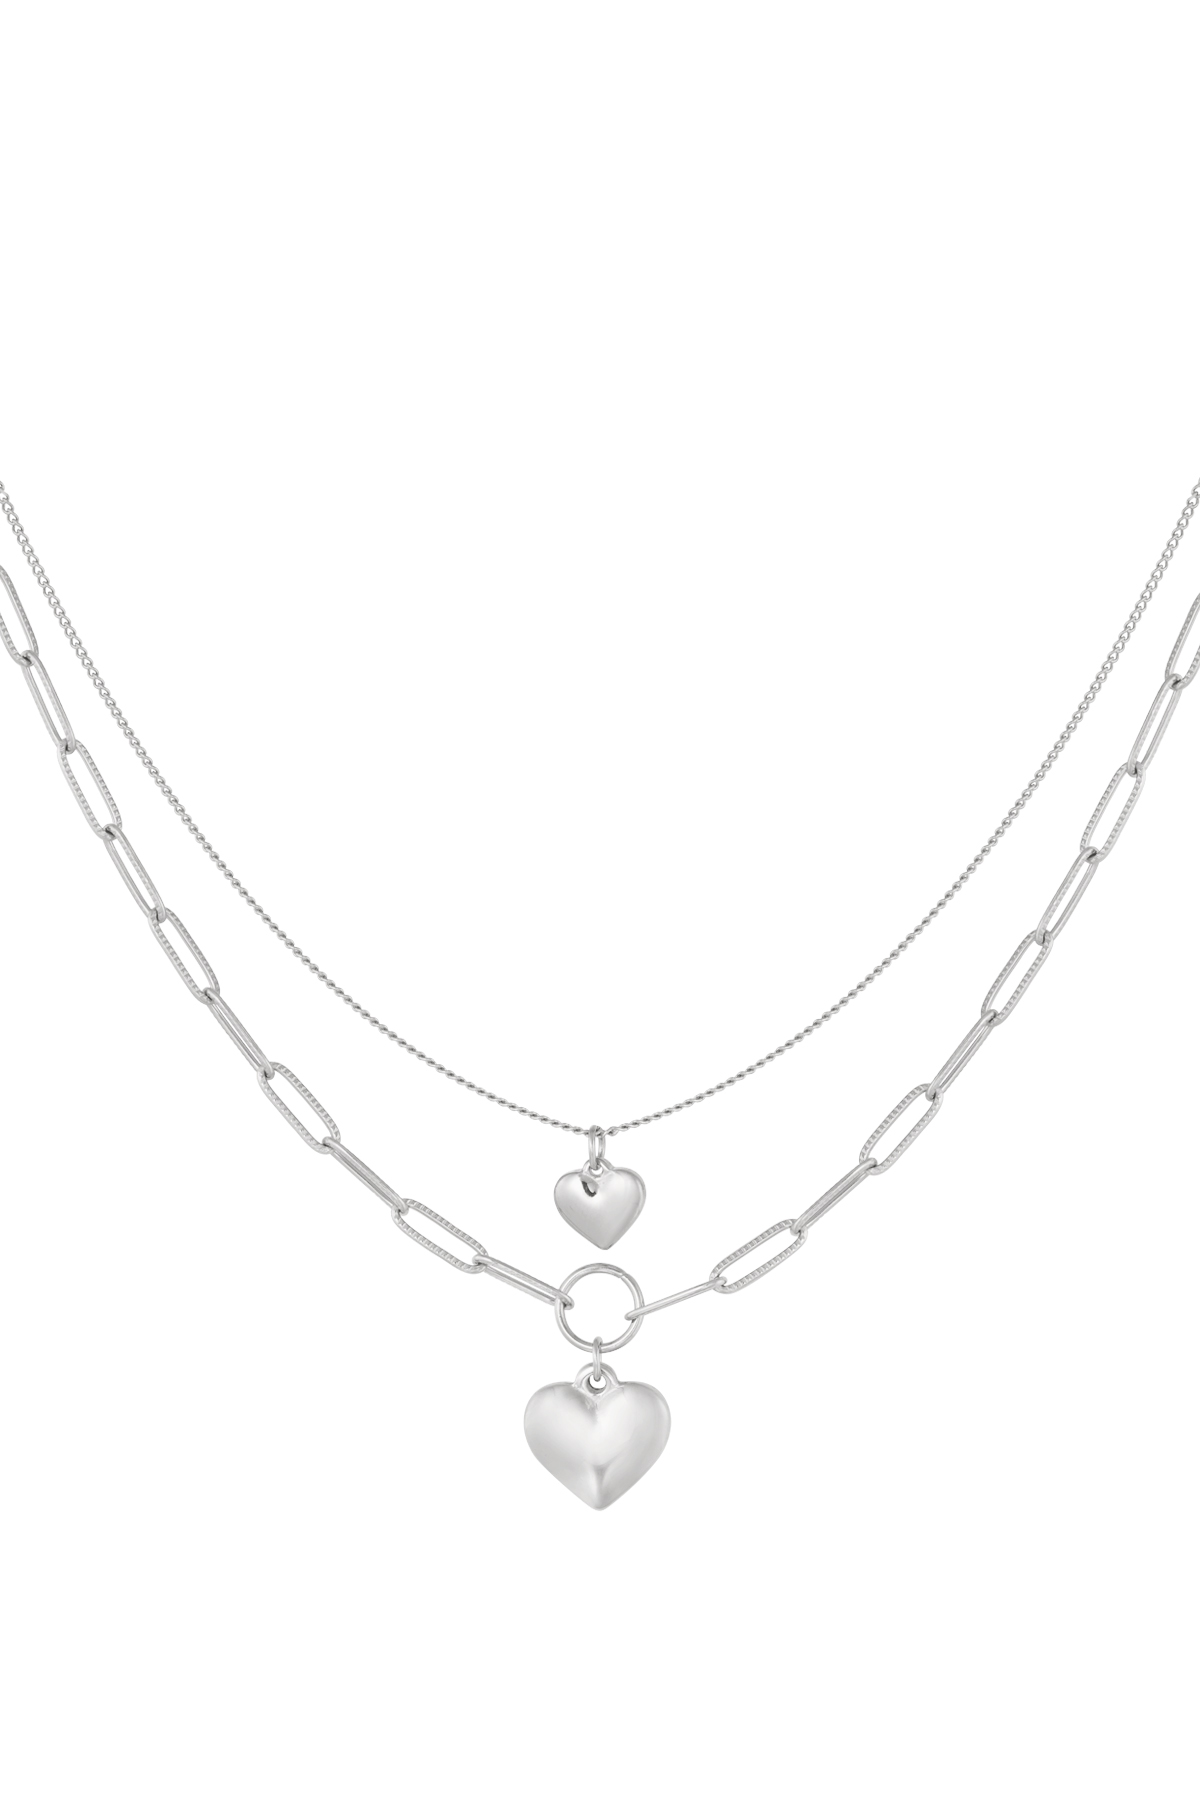 Double chain necklace with hearts - silver